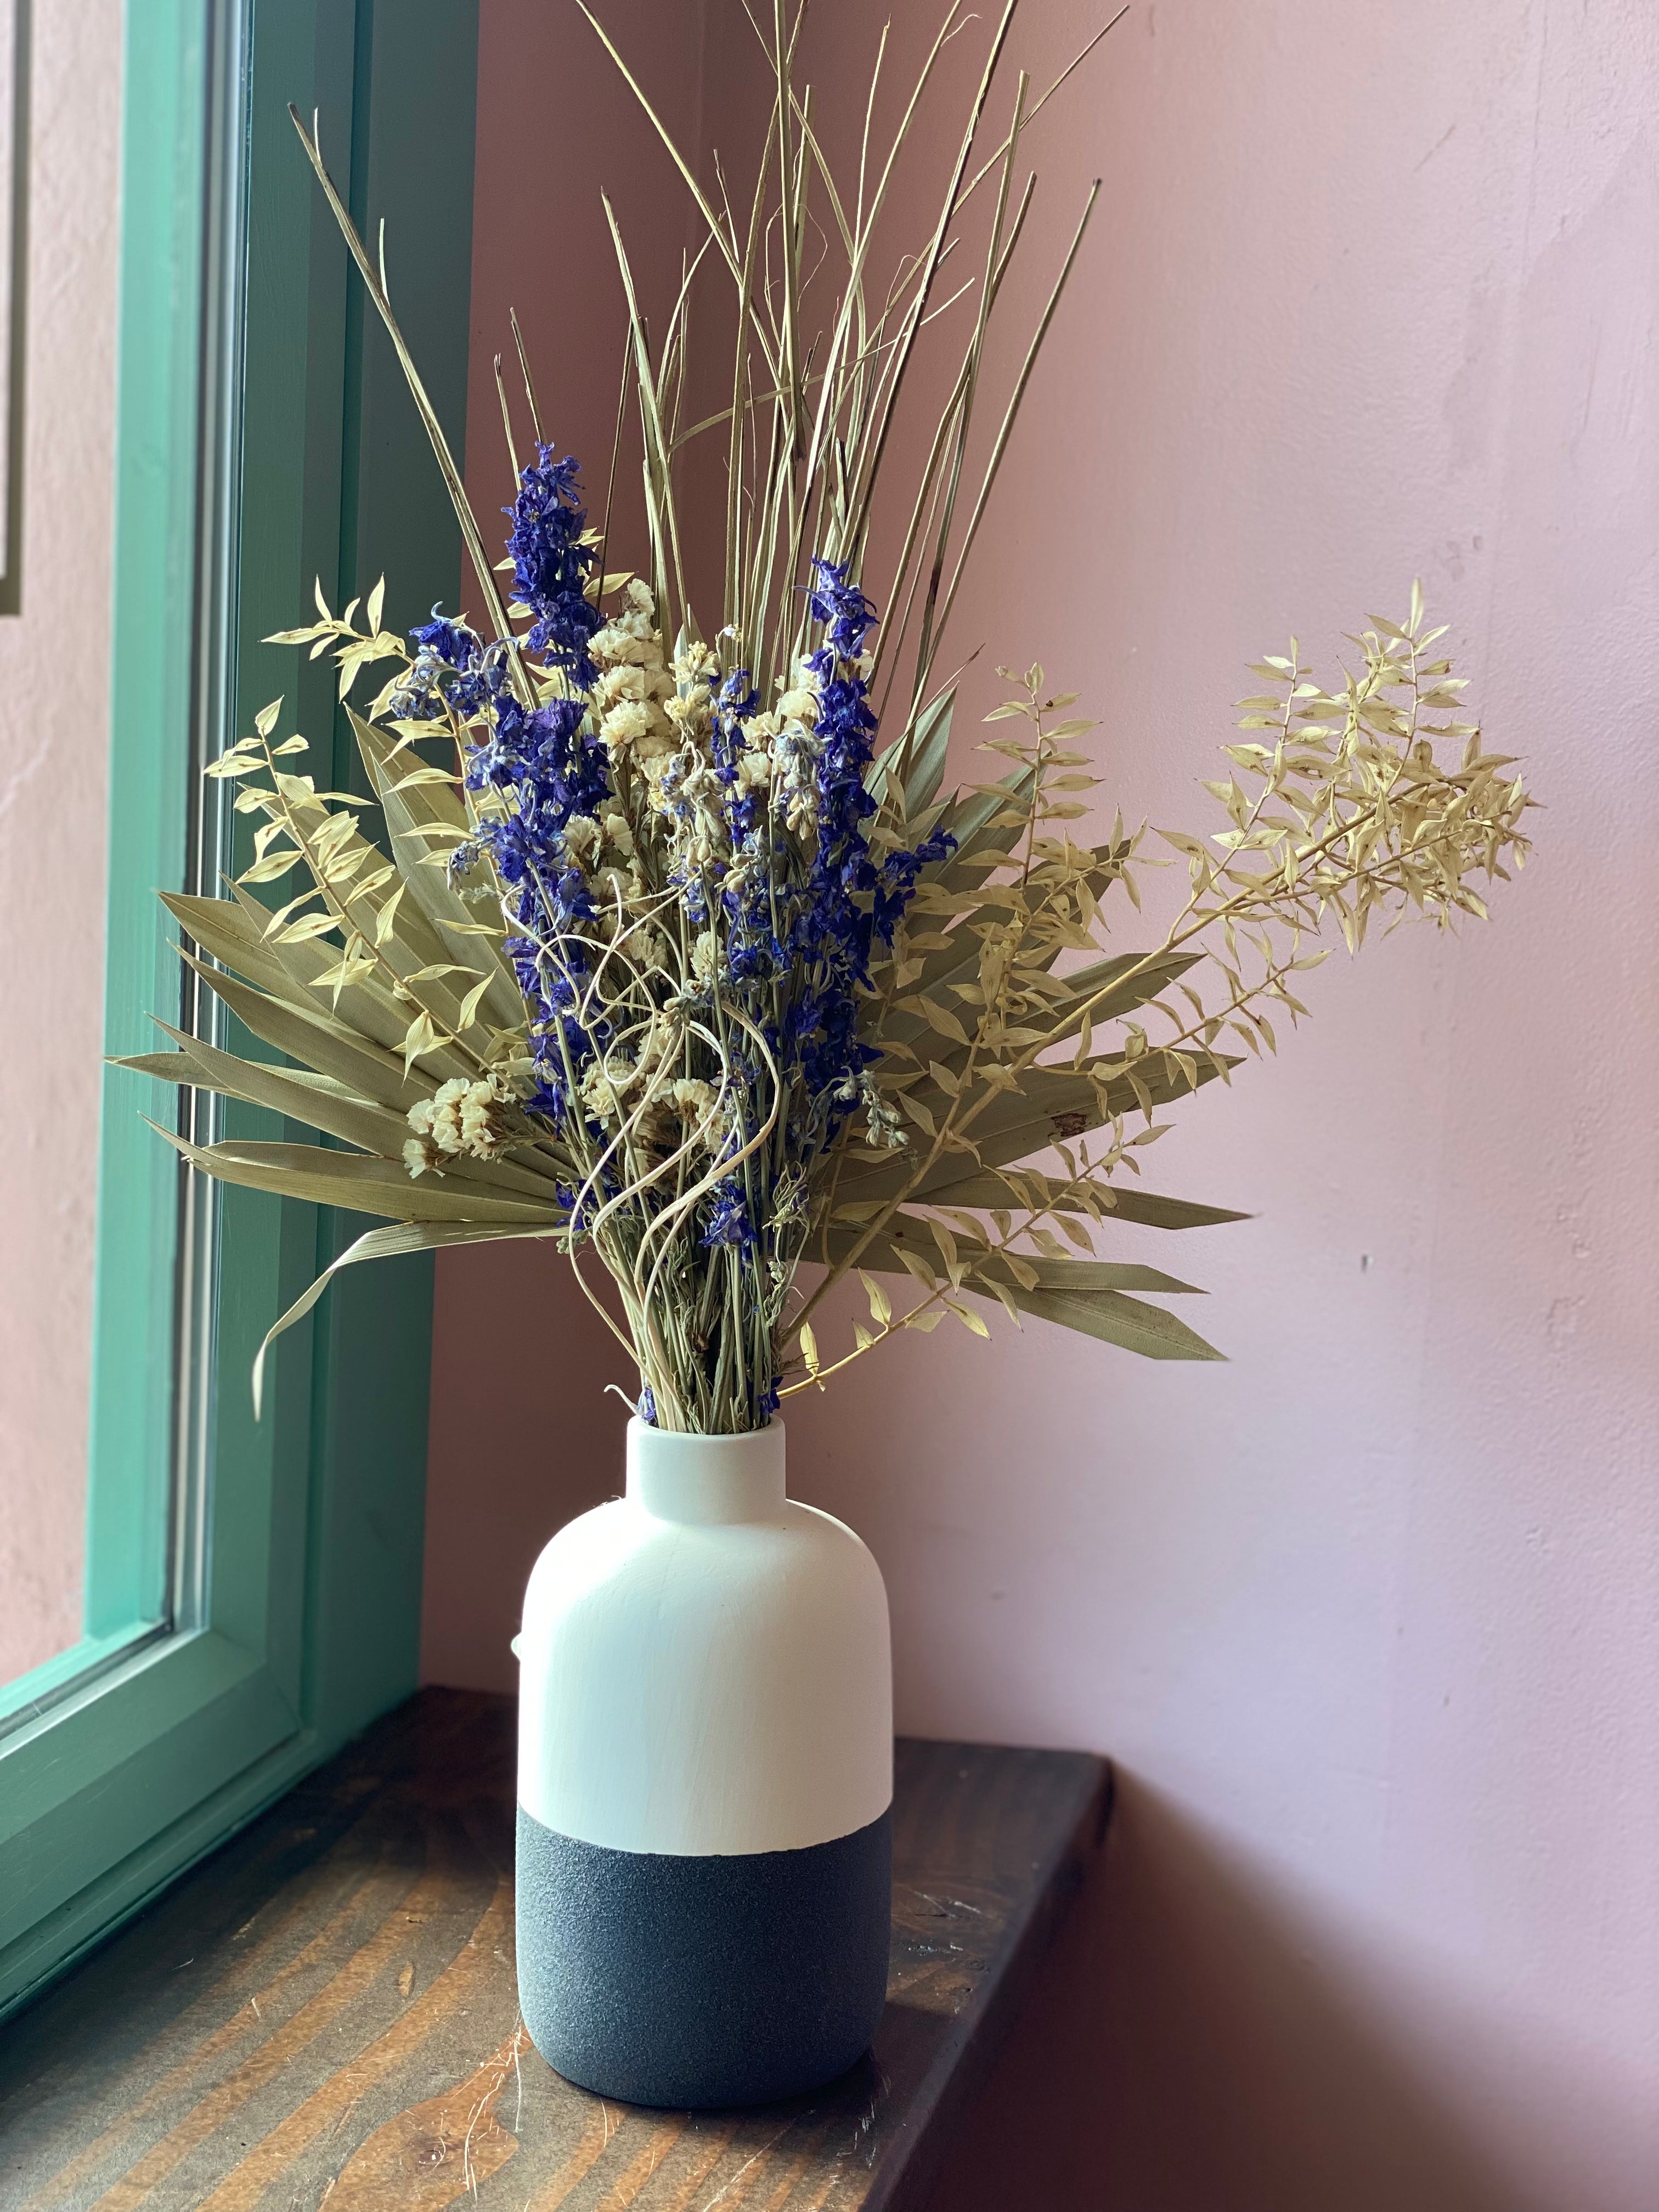 Dried Flowers in White/ Grey Vase